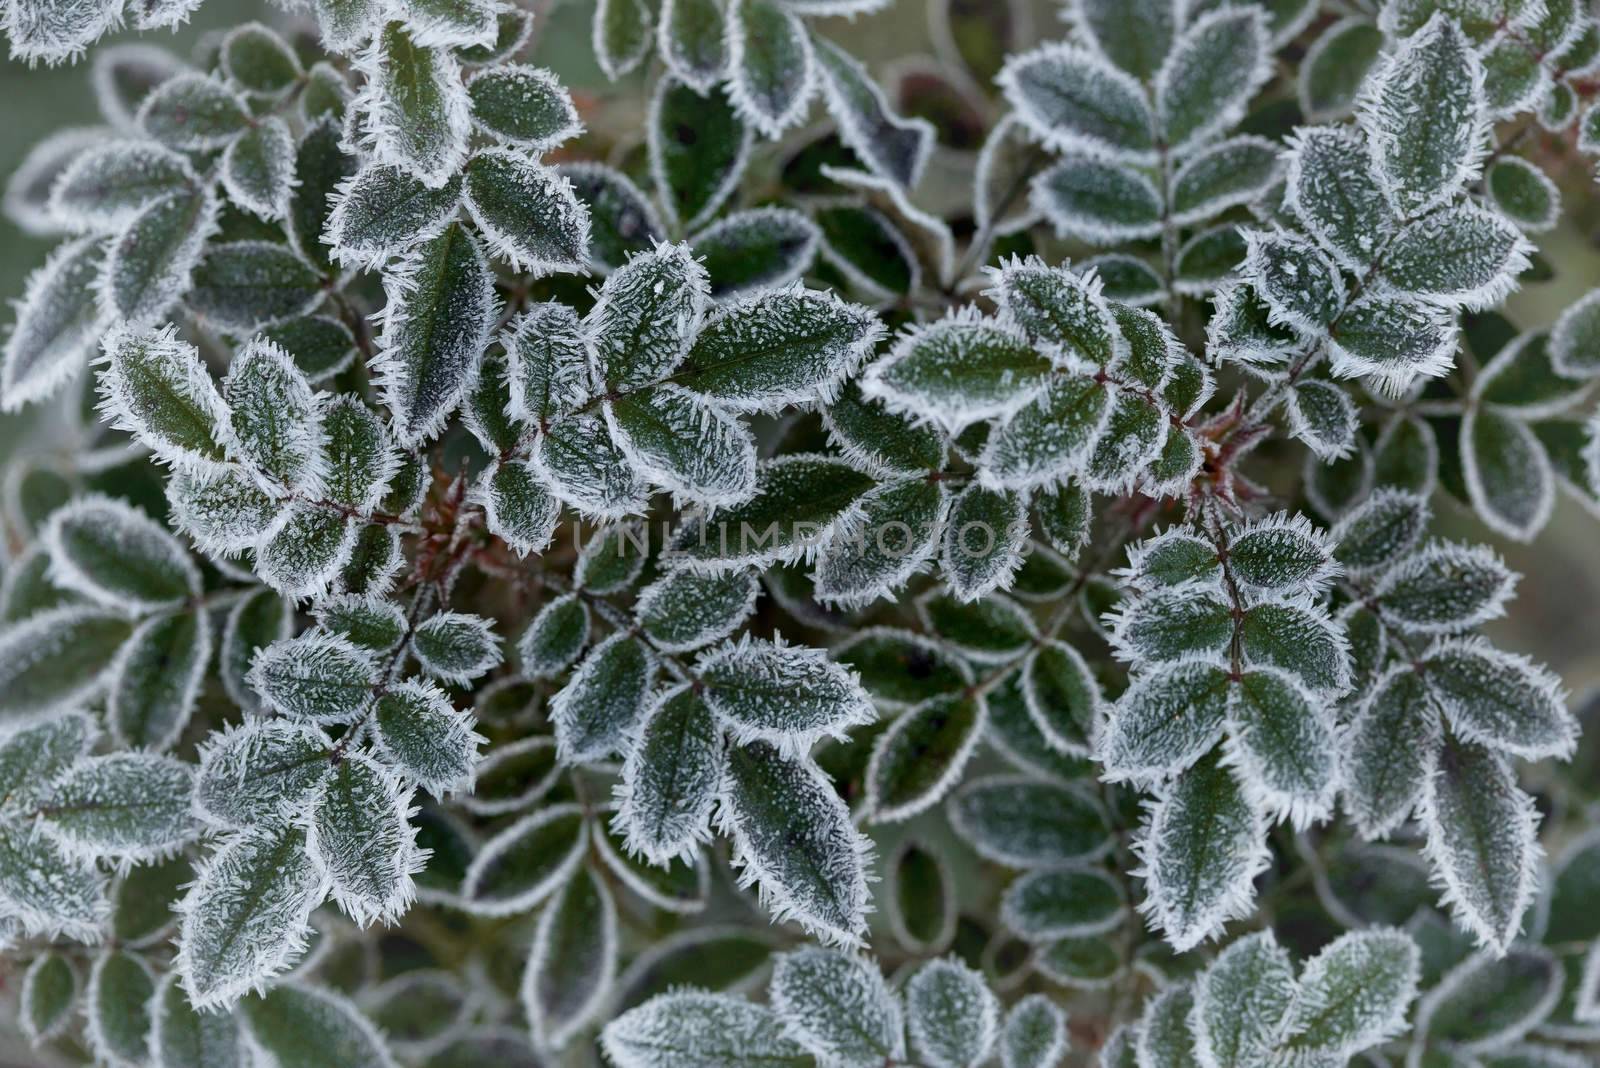 Green leaves of roses, covered with white frost.